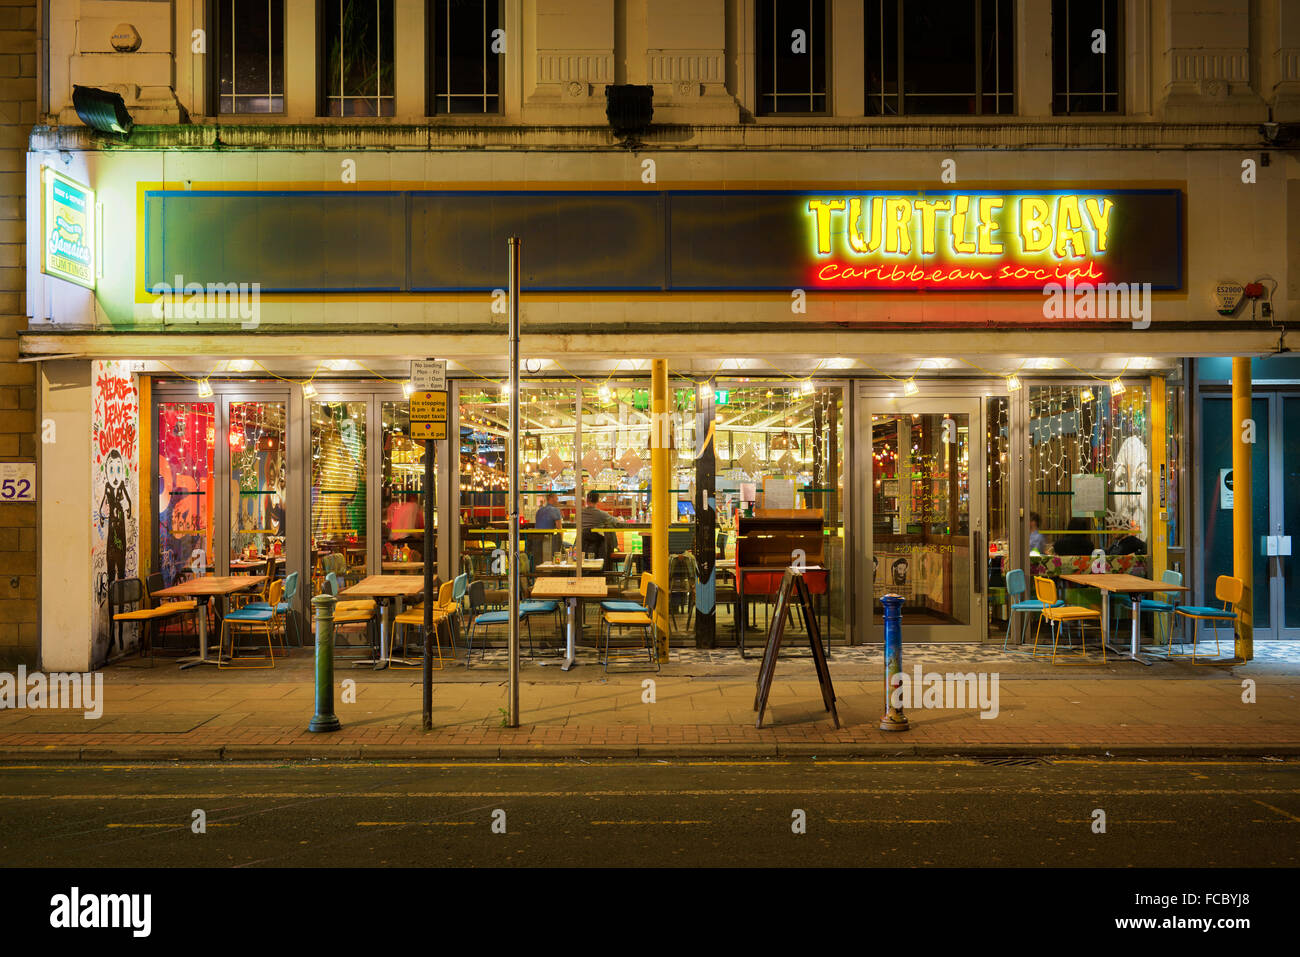 The Turtle Bay Caribbean themed restaurant located on Oldham Street in Manchester City Centre. Stock Photo